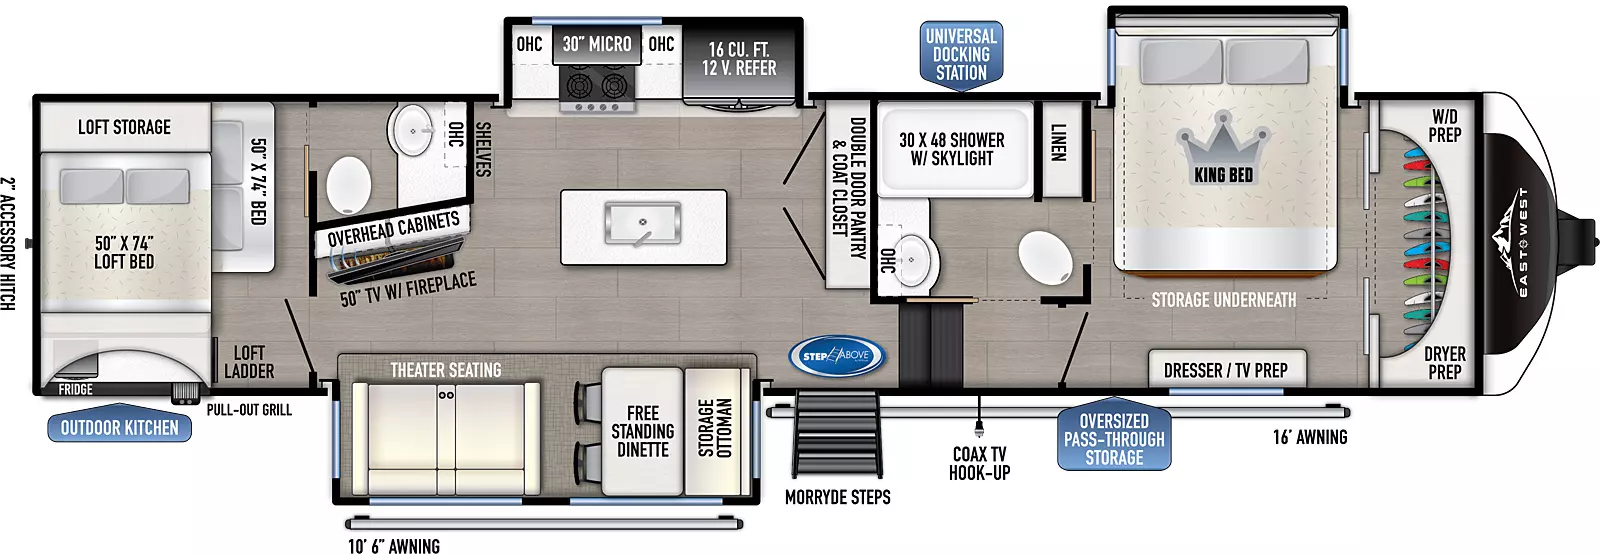 The 375 BH-OK has 3 slide outs, two on the off door side and one on the door side along with one entry door. Interior layout from front to back: front bedroom with front closet and off door side slide-out with king bed and underbed storage; side aisle bathroom with solid pocket doors, shower, medicine cabinet above the sink and a porcelain toilet; kitchen living dining area features a double door pantry and coat closet; kitchen island with deep seated sink; off door side slide-out containing refrigerator, oven and microwave; door side slide-out containing dinette and theater seating across from angled entertainment center; rear bunk room with half bathroom and  50" x 74" lofted bunk above 50" x 74" bed.